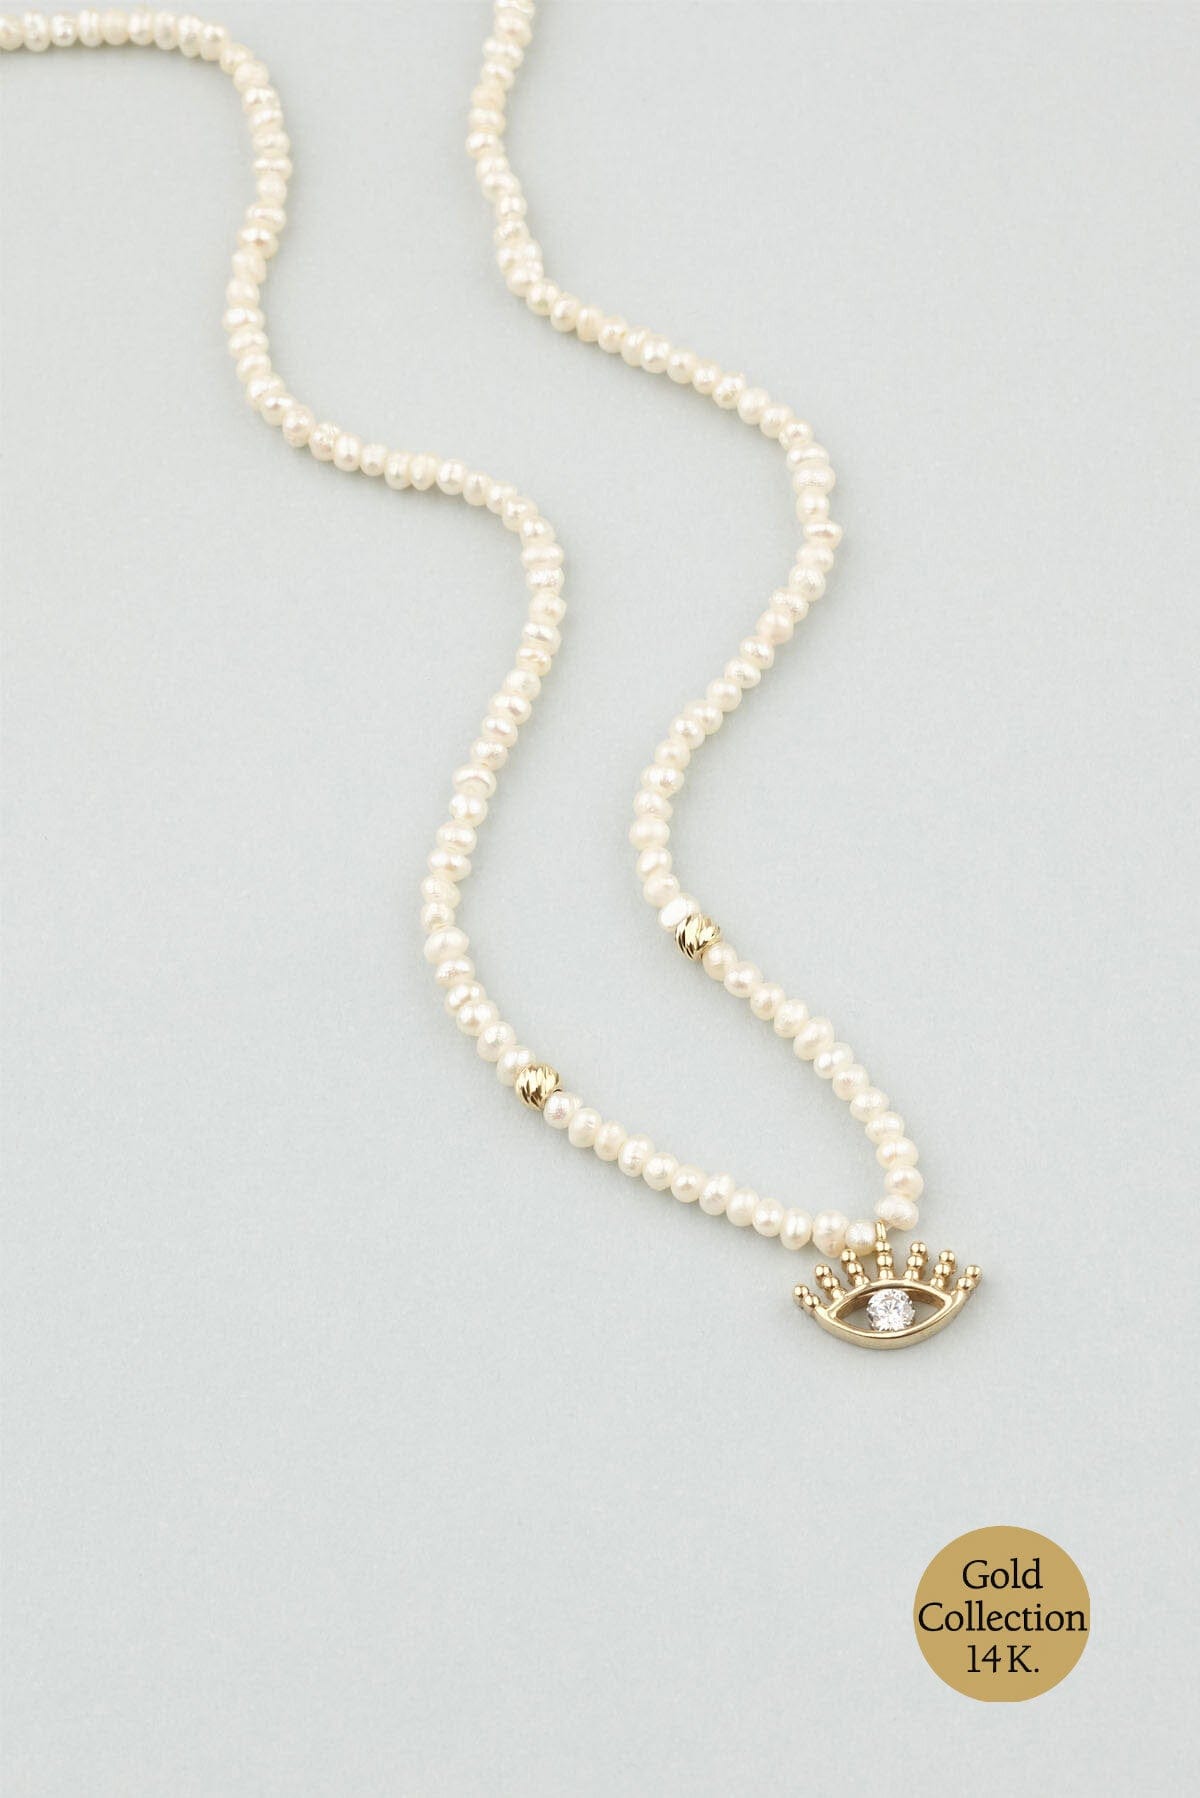 14 K Gold Necklace with Eye Figured Pearl Stones SoChic